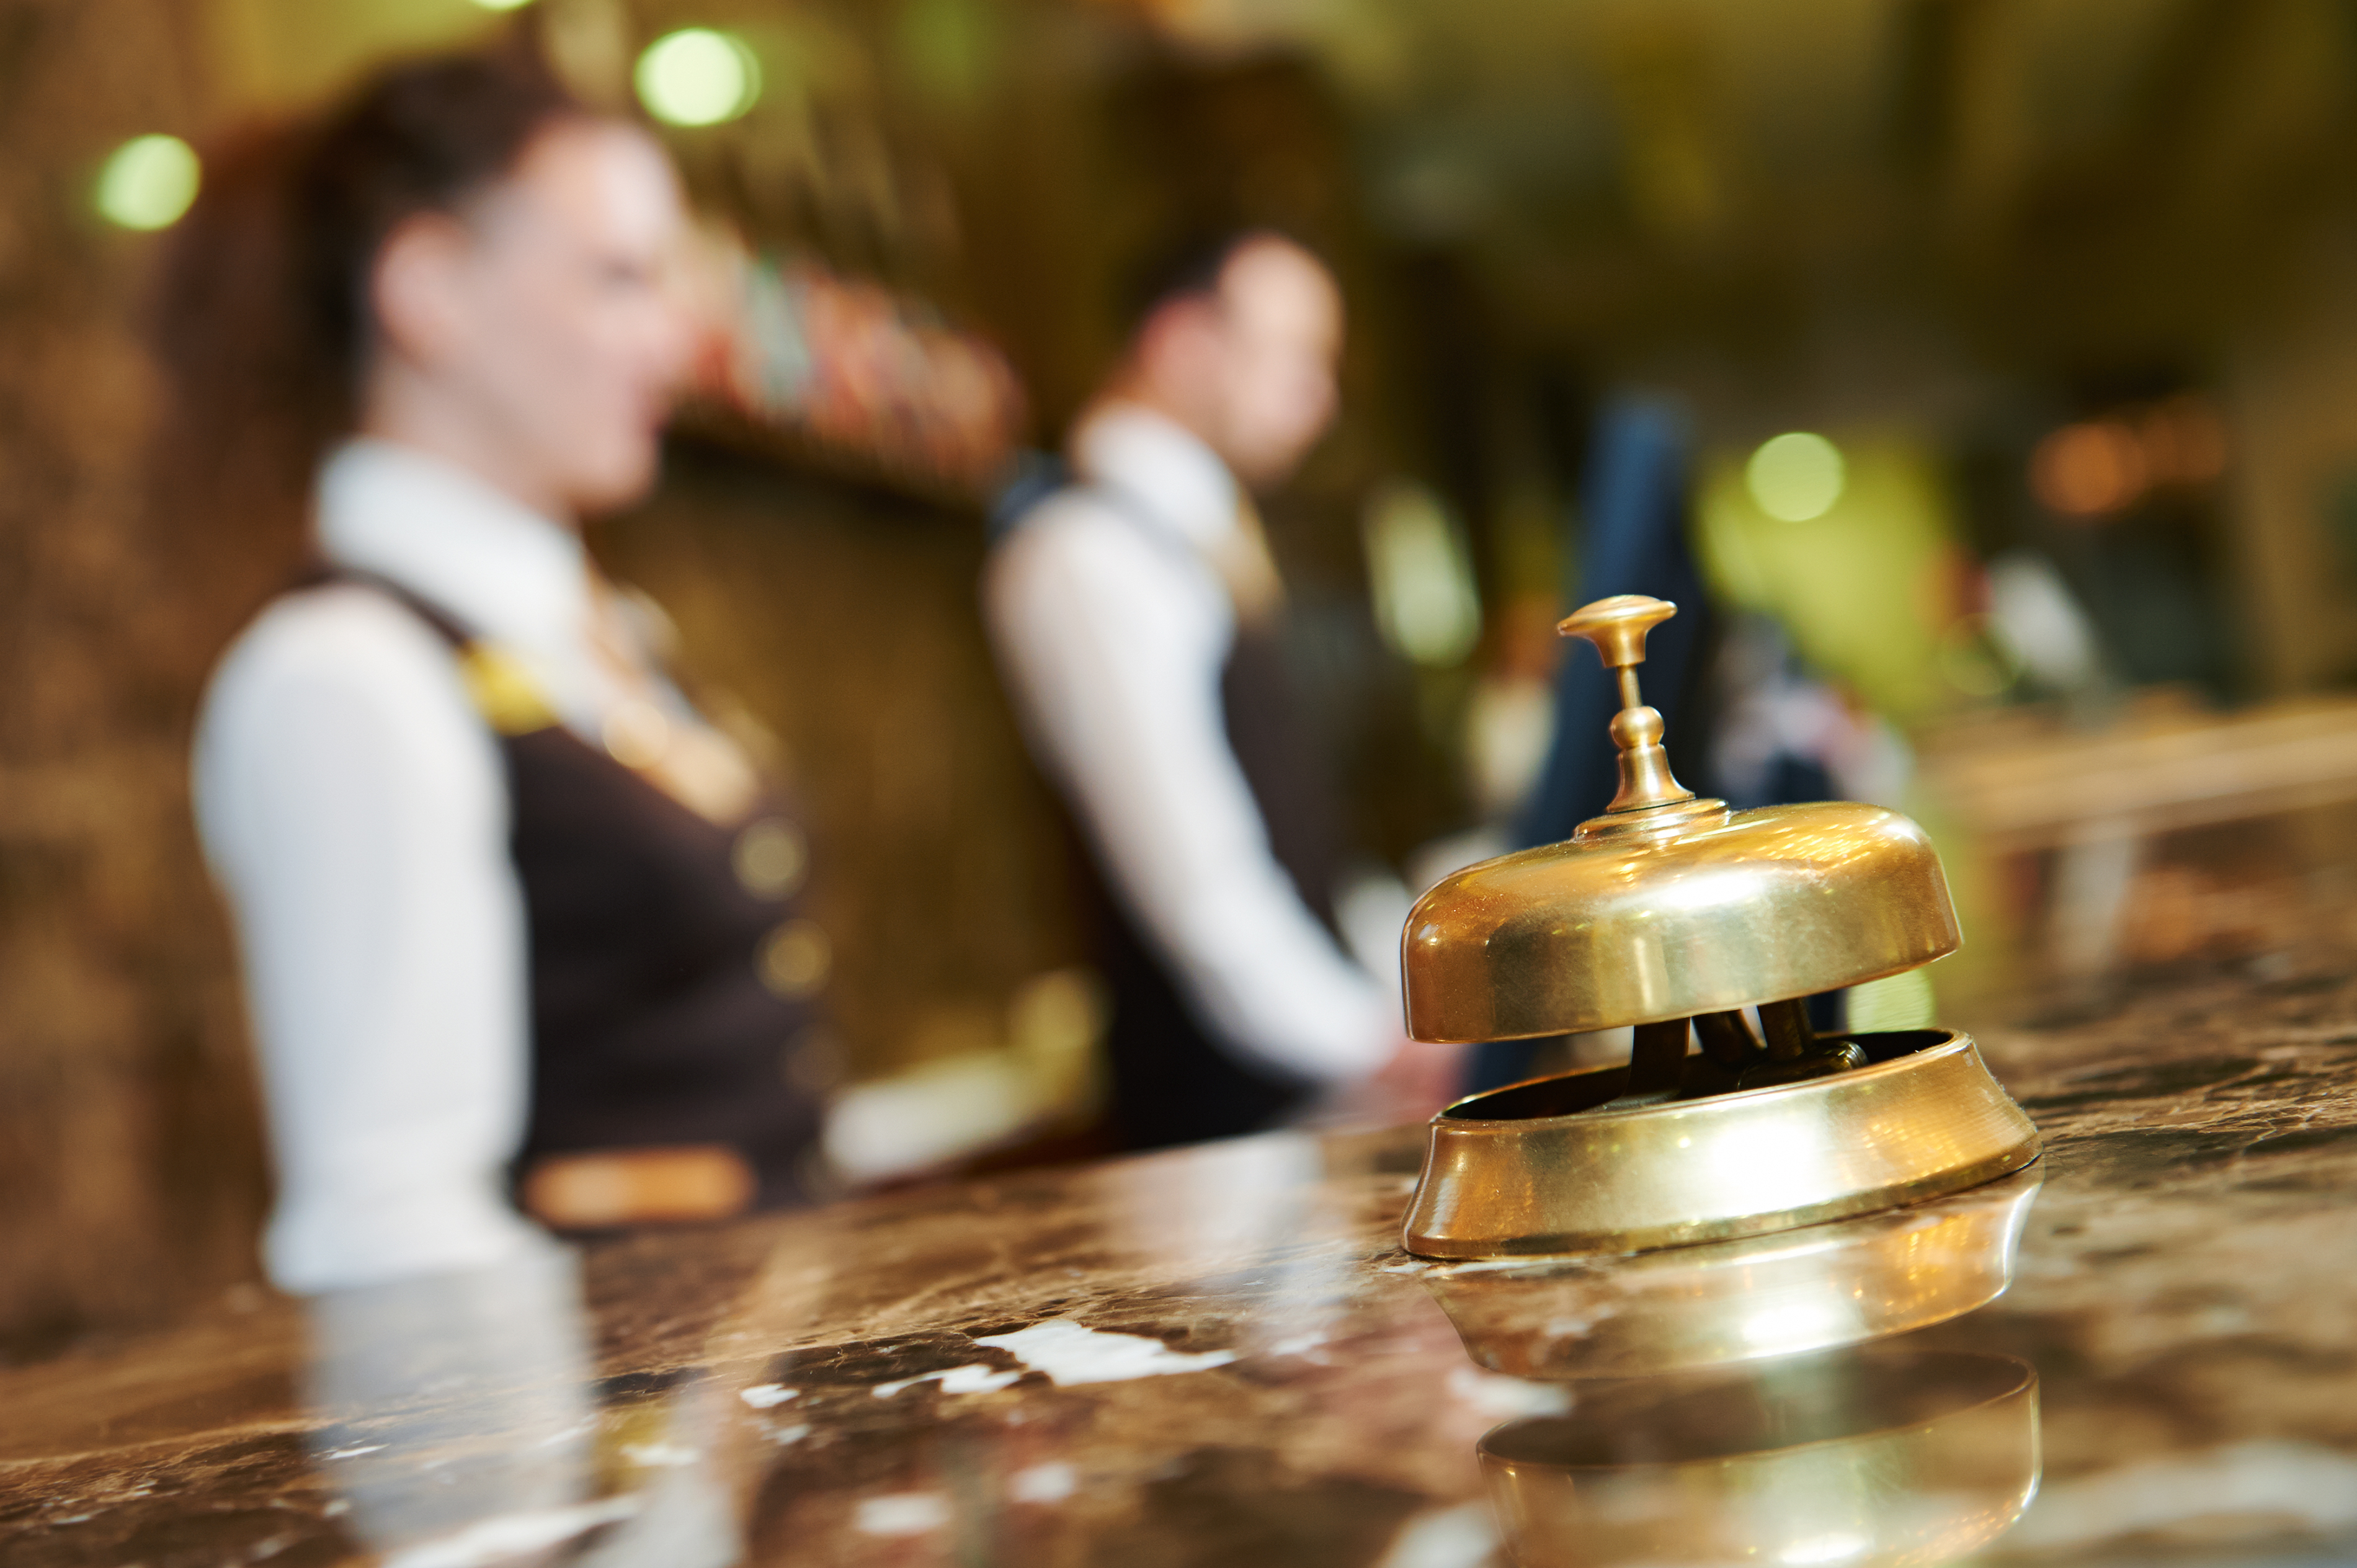 Should Hotel Chains Be Held Liable for Human Trafficking?